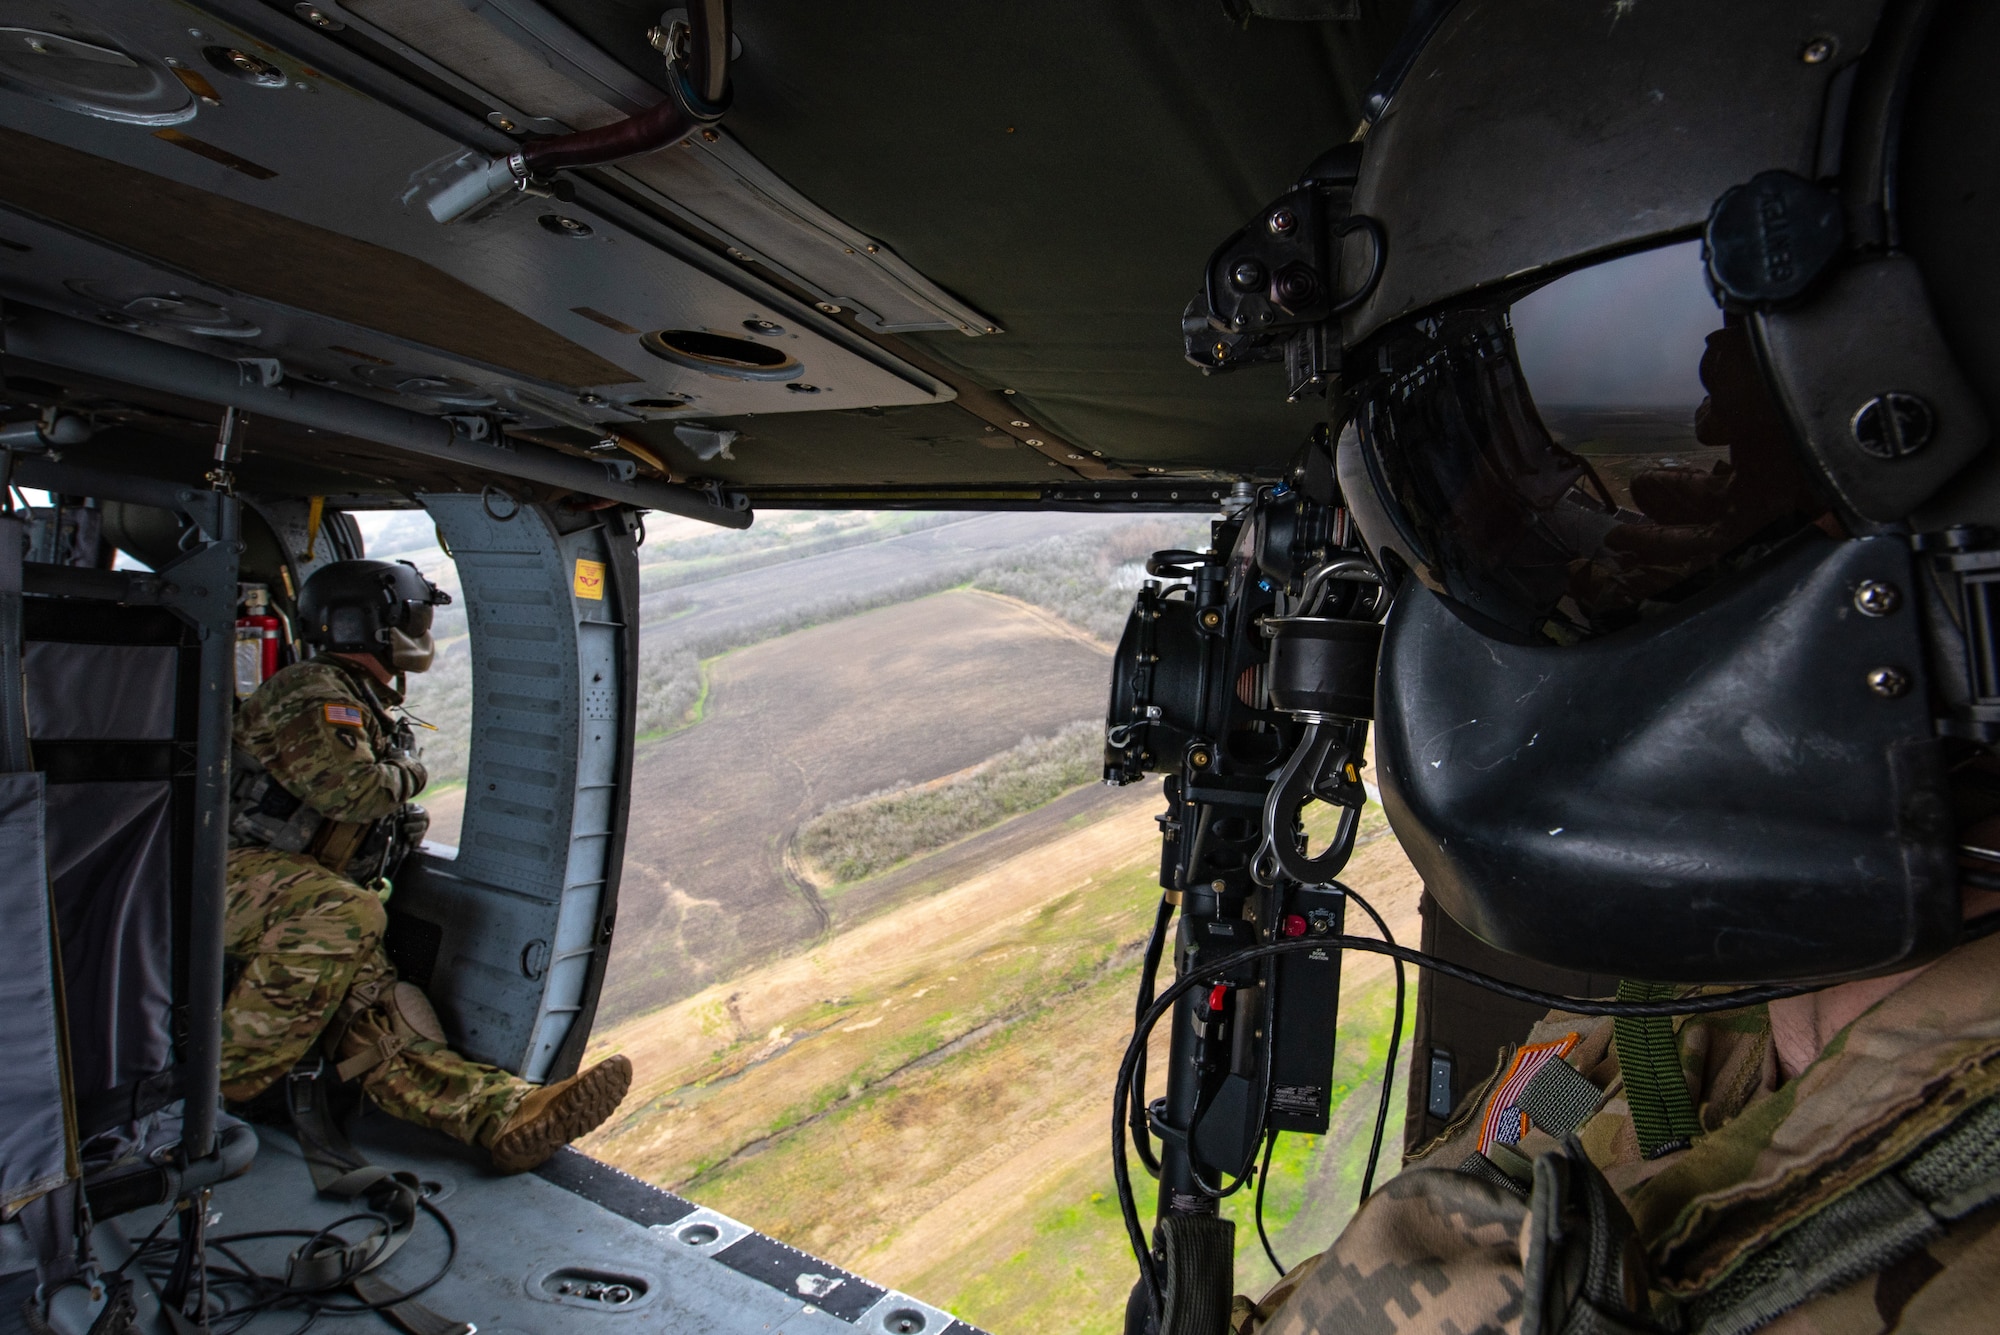 Sergeant First Class Dion Cortez, left, and Staff Sergeant Charles Jackson look out the doors of a UH-60 Black Hawk helicopter during a sling load training event at Martindale Army Airfield, San Antonio, TX, Feb. 1, 2019.